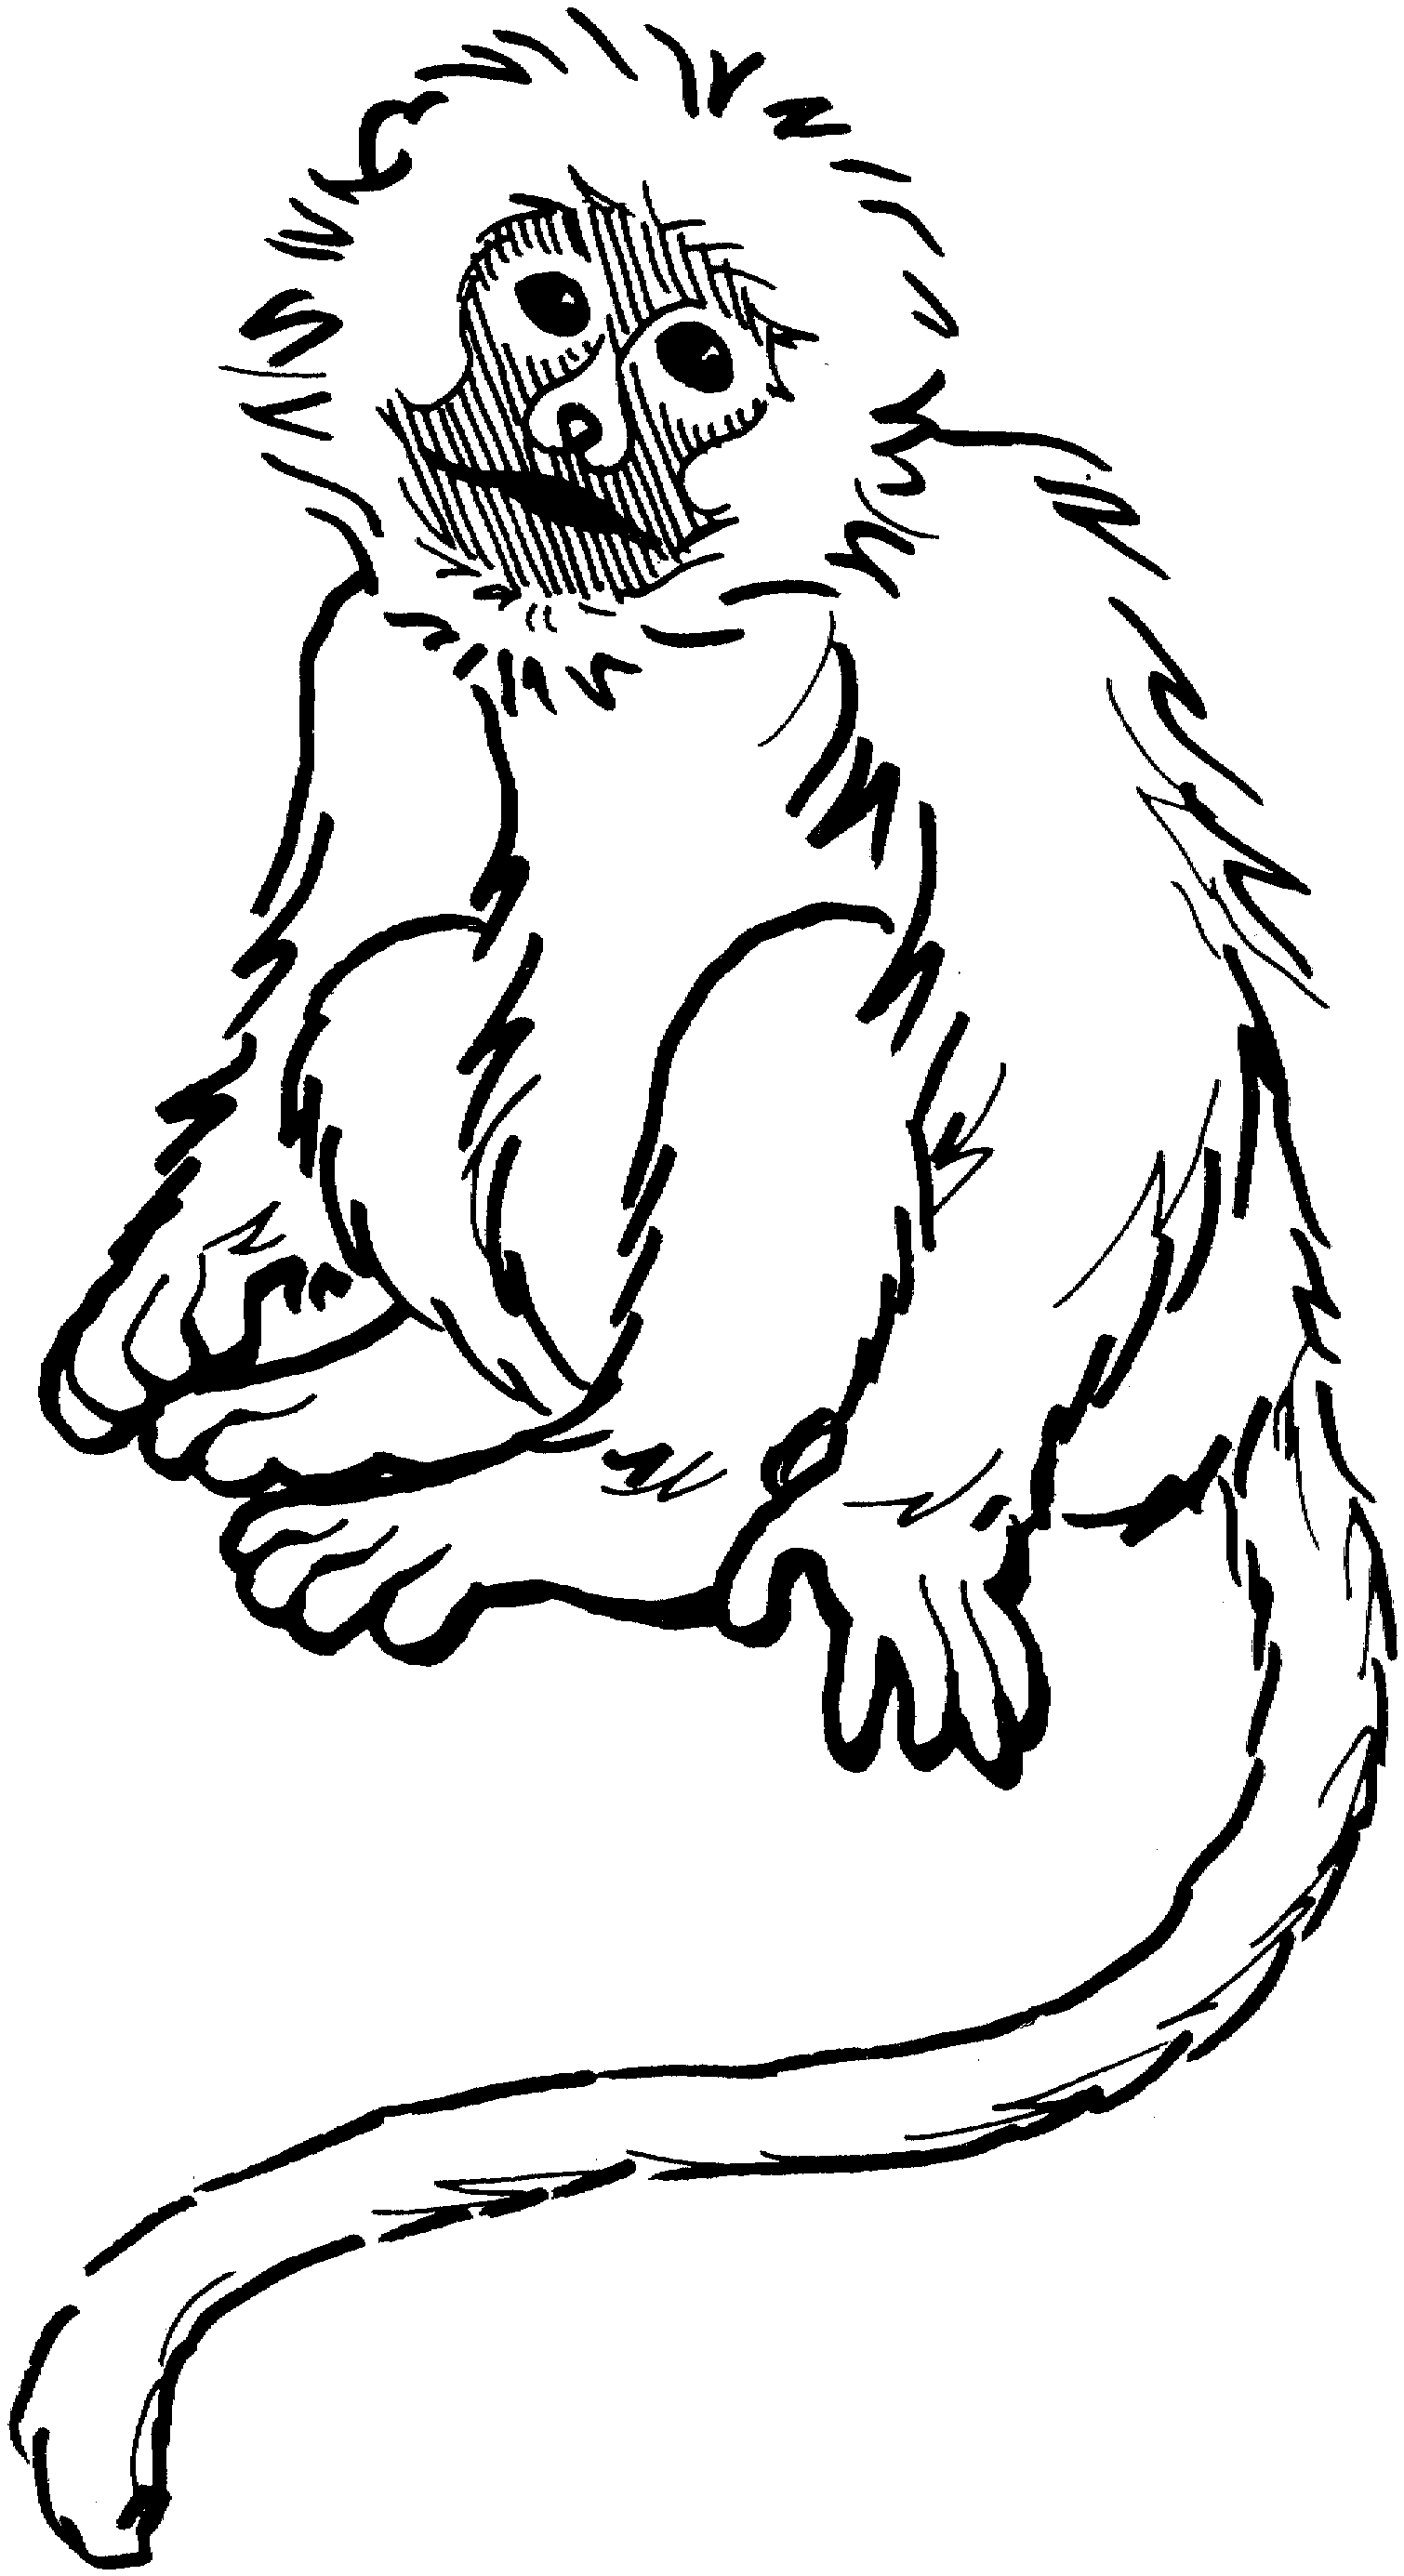 Spider Monkey clipart #2, Download drawings